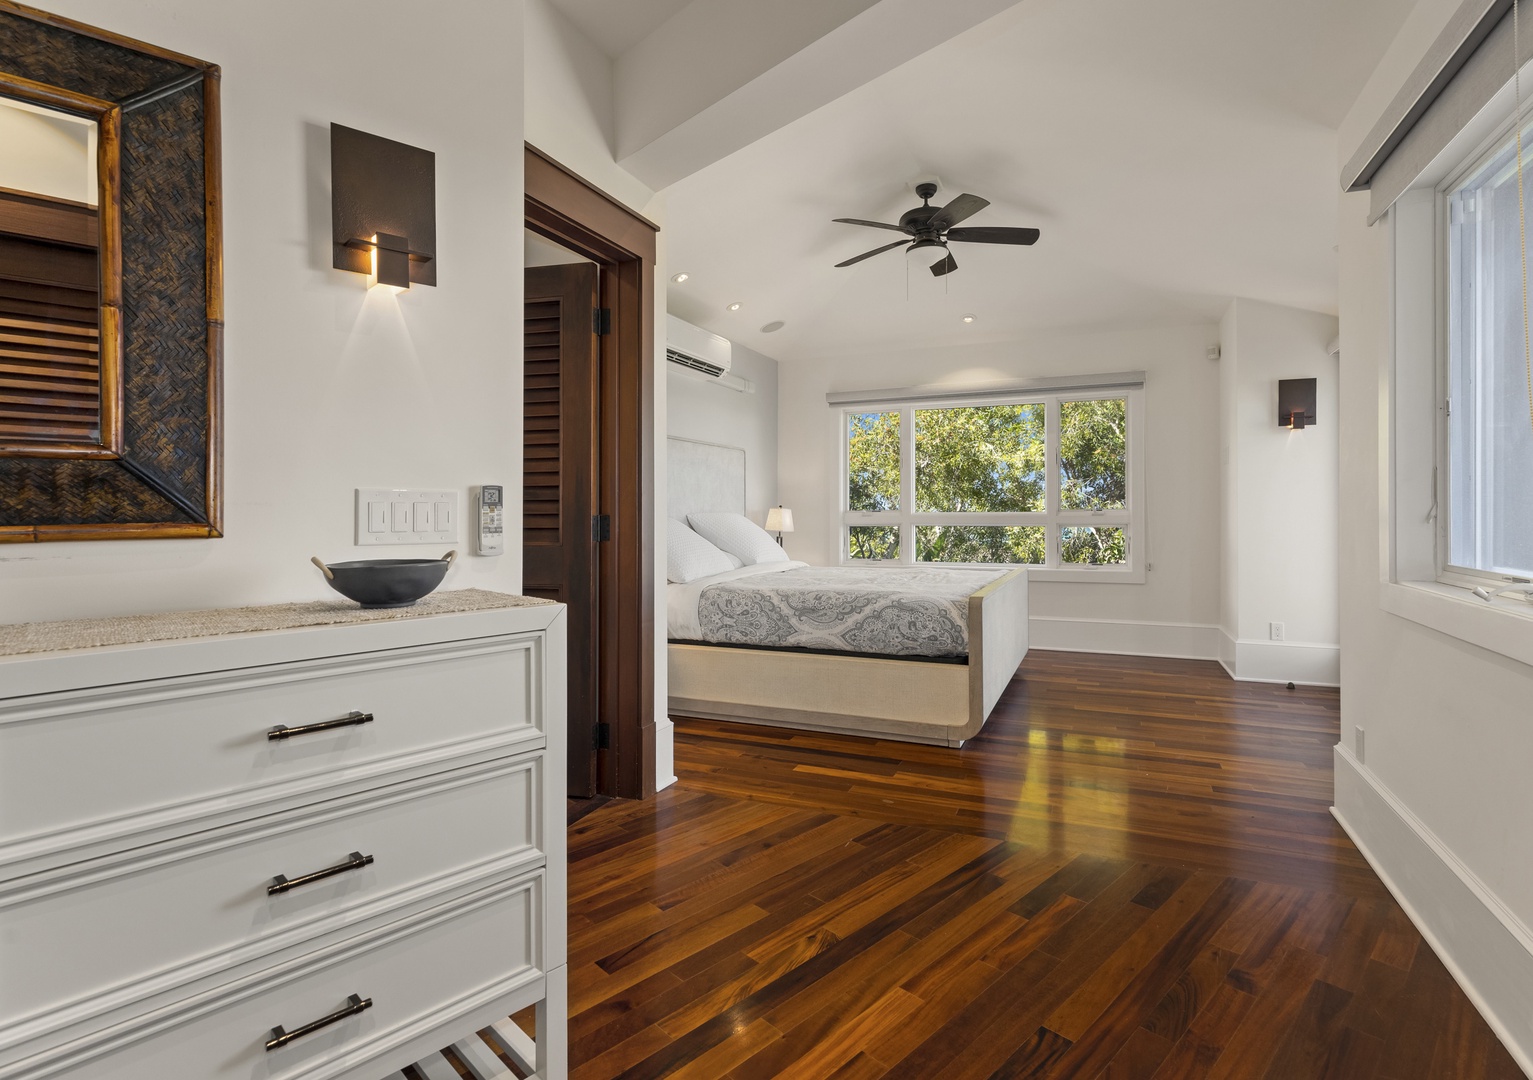 Kailua Vacation Rentals, Lanikai Villa* - This spacious primary bedroom is fit for luxurious living